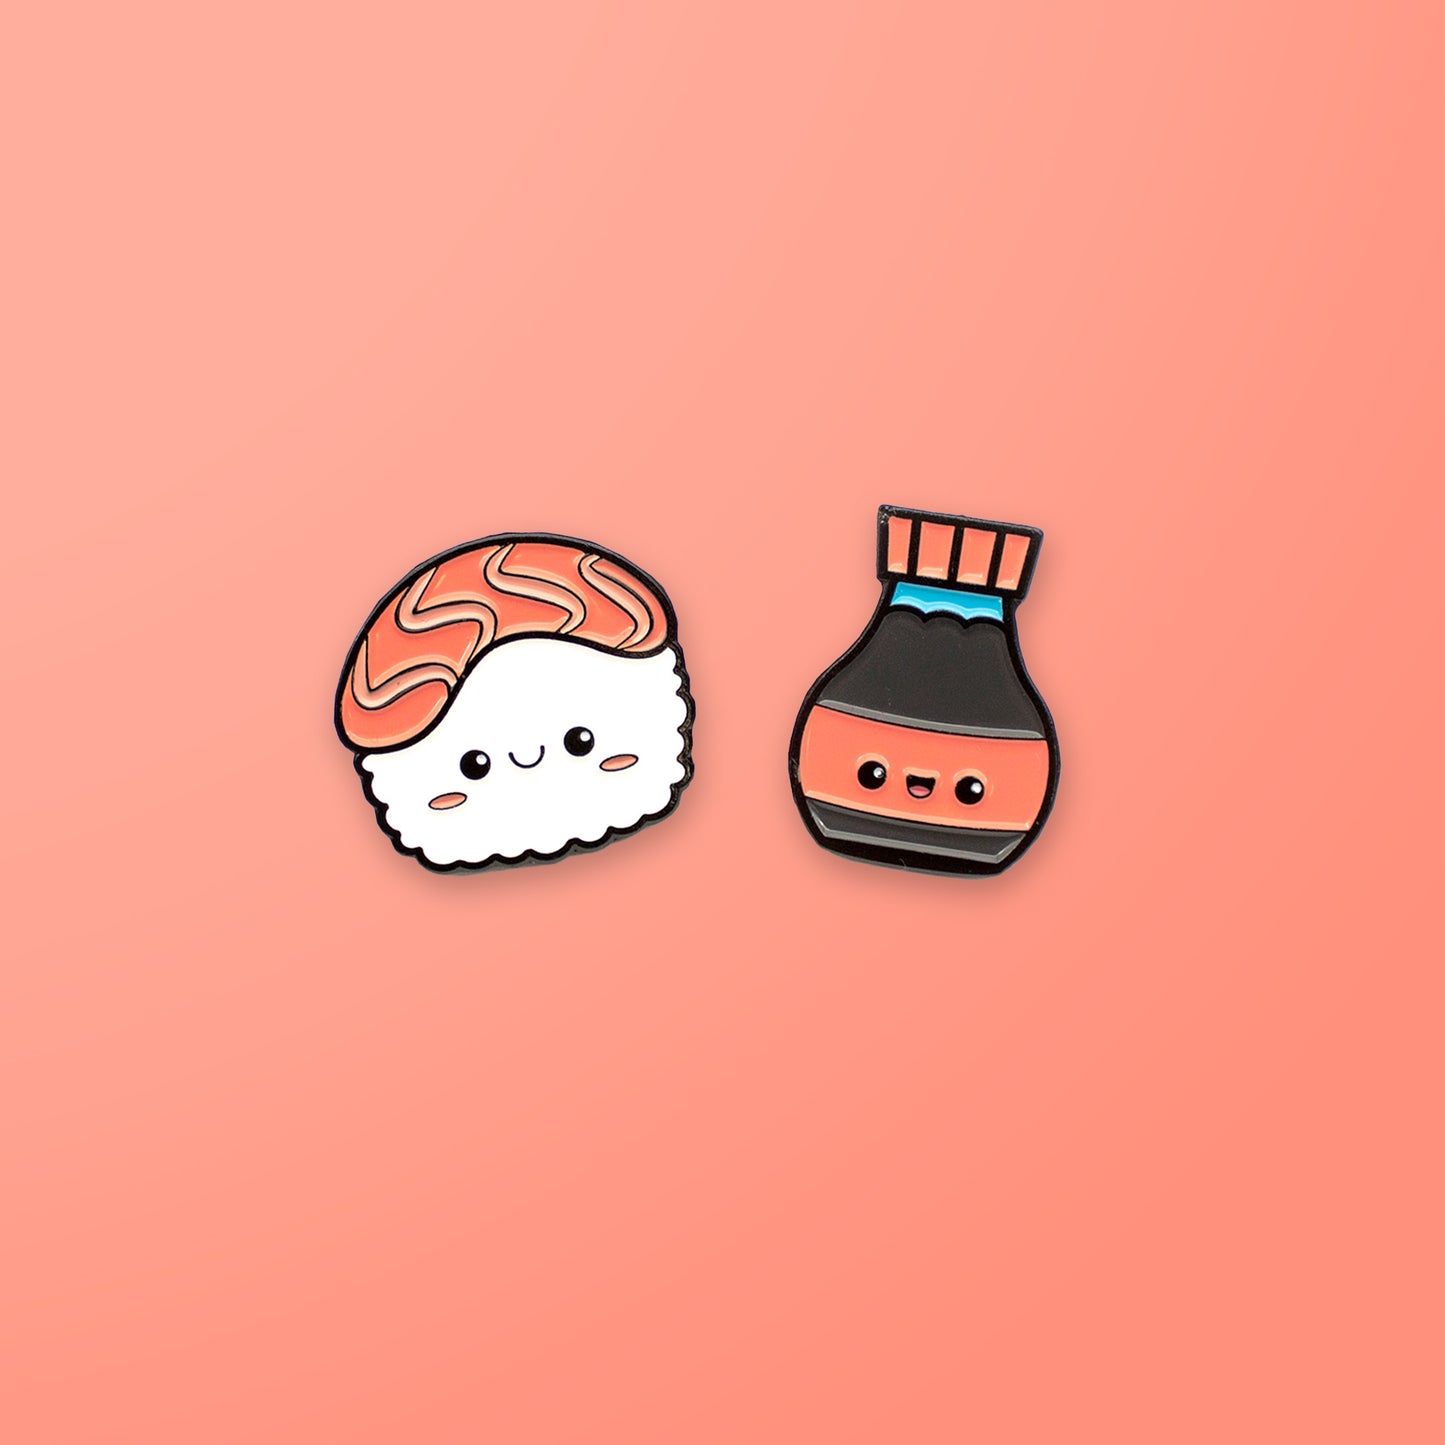 Sushi and Soy Sauce enamel pin set on pink background